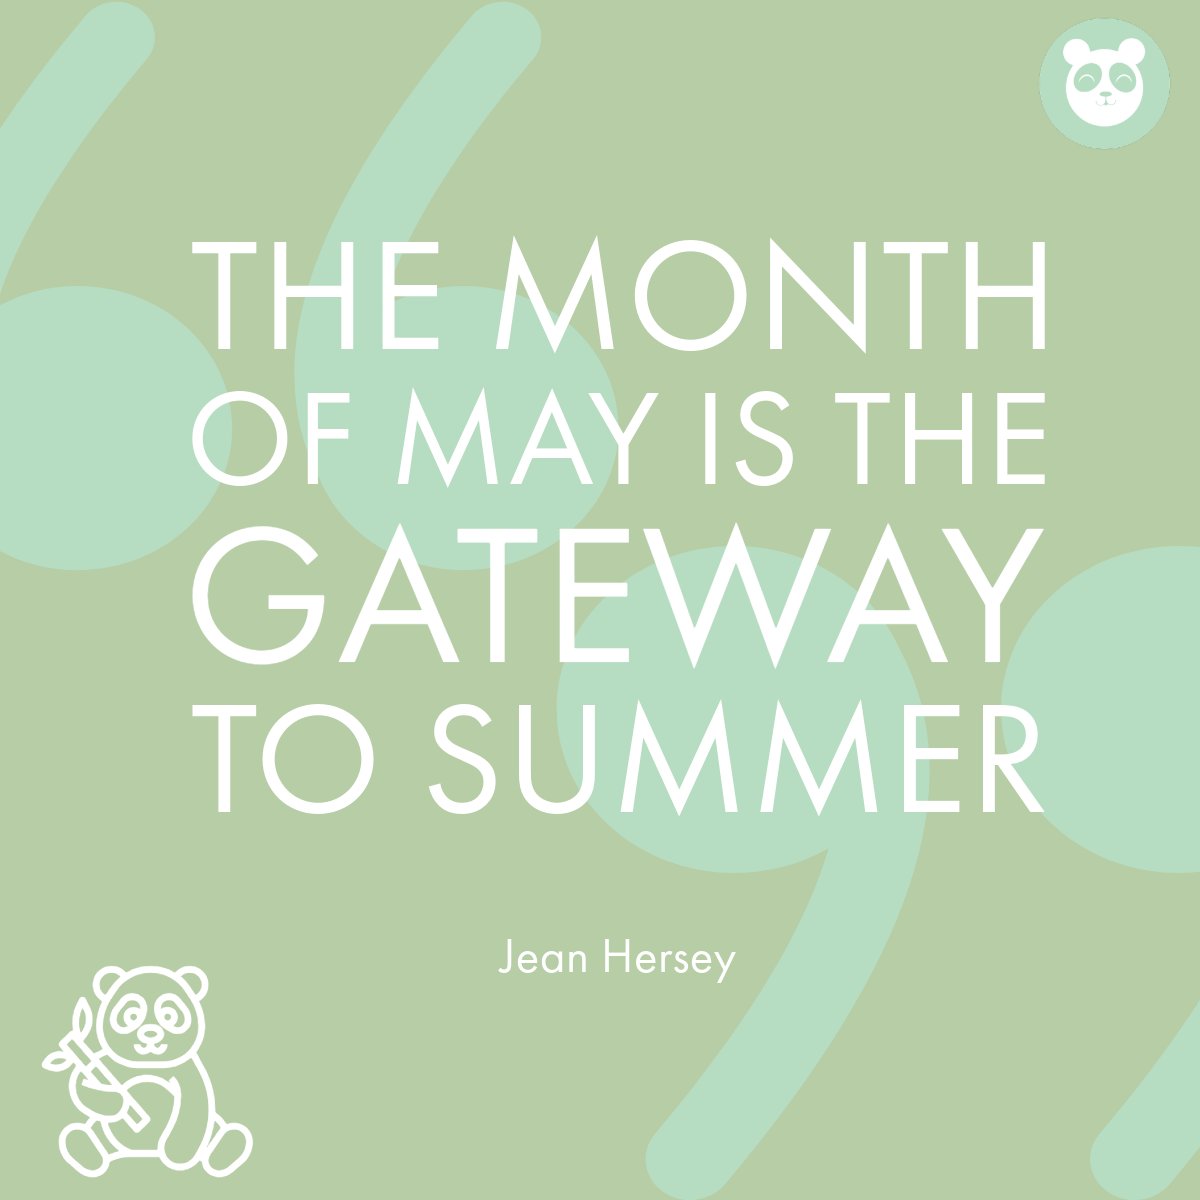 🌸The month of May is the gateway to summer - Jean Hersey🌸
#quoteofthemonth #springvibes #mayquotes #springquote #summervibes #sublimationbusinessowner #sublimationdesign #sublimationuk #sublimationprinting #supportsmallbusiness #supportindependentbusiness #supportmumsinbusiness